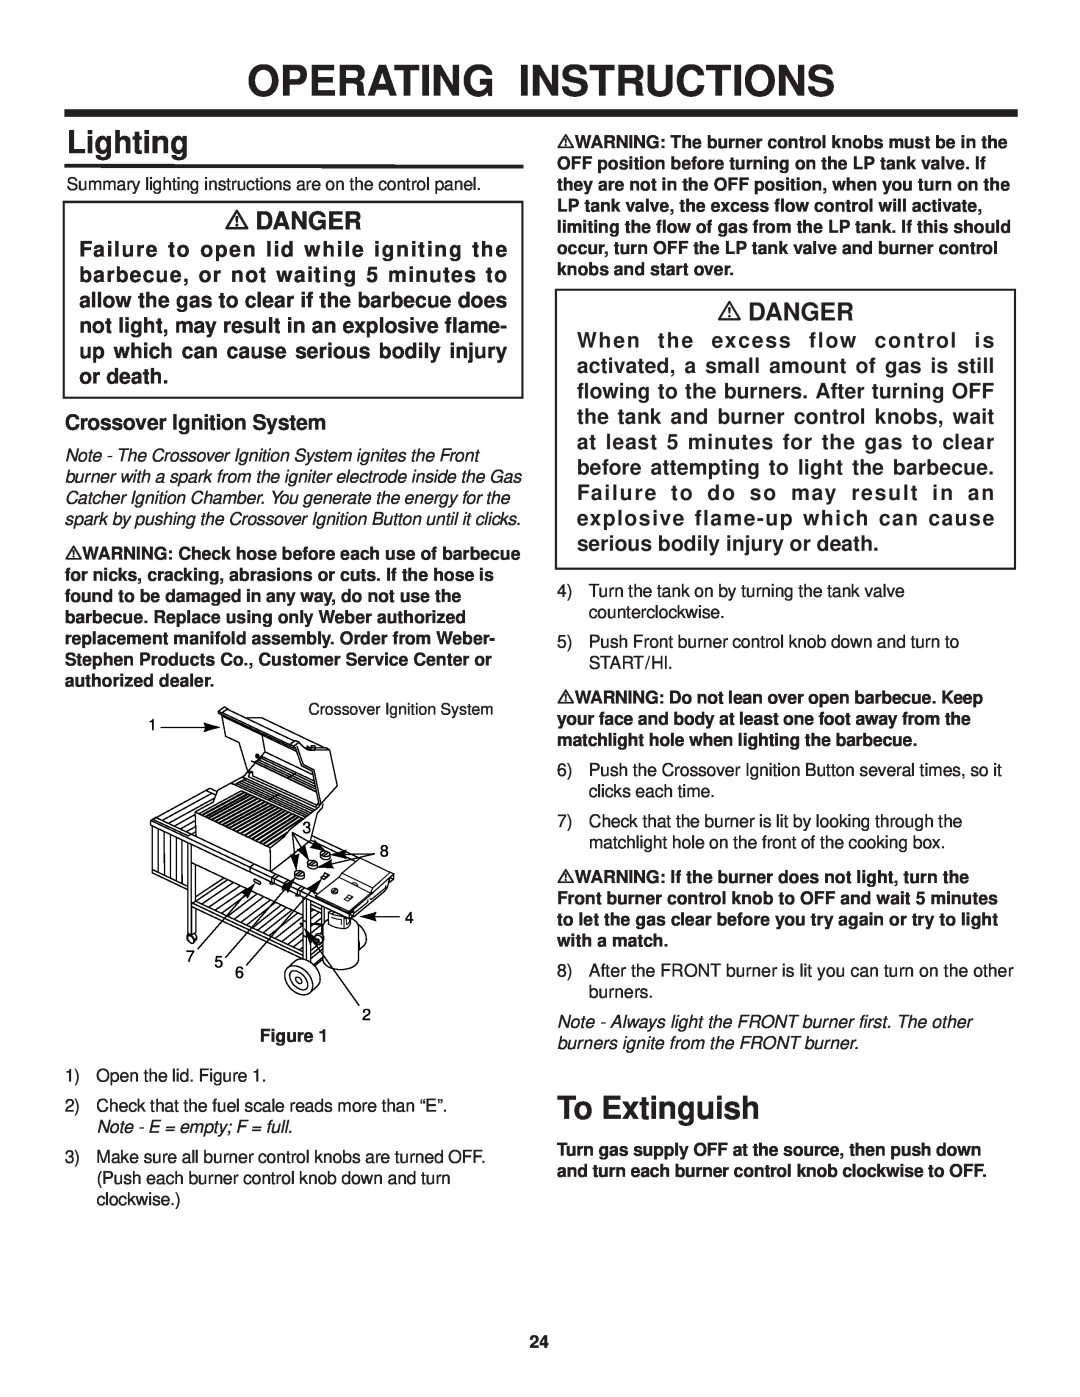 Weber 3000 LX owner manual Operating Instructions, Lighting, To Extinguish, mDANGER, Crossover Ignition System 